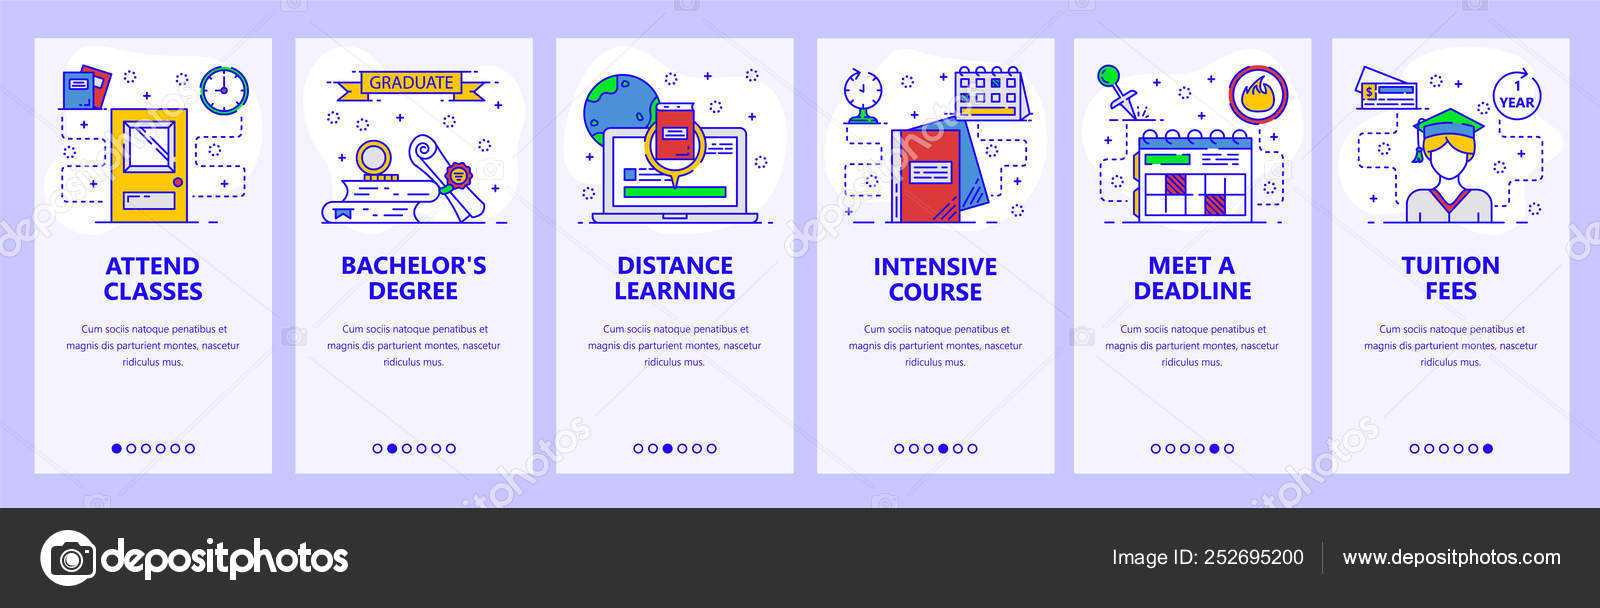 Mobile App Onboarding Screens. School And College Education For College Banner Template